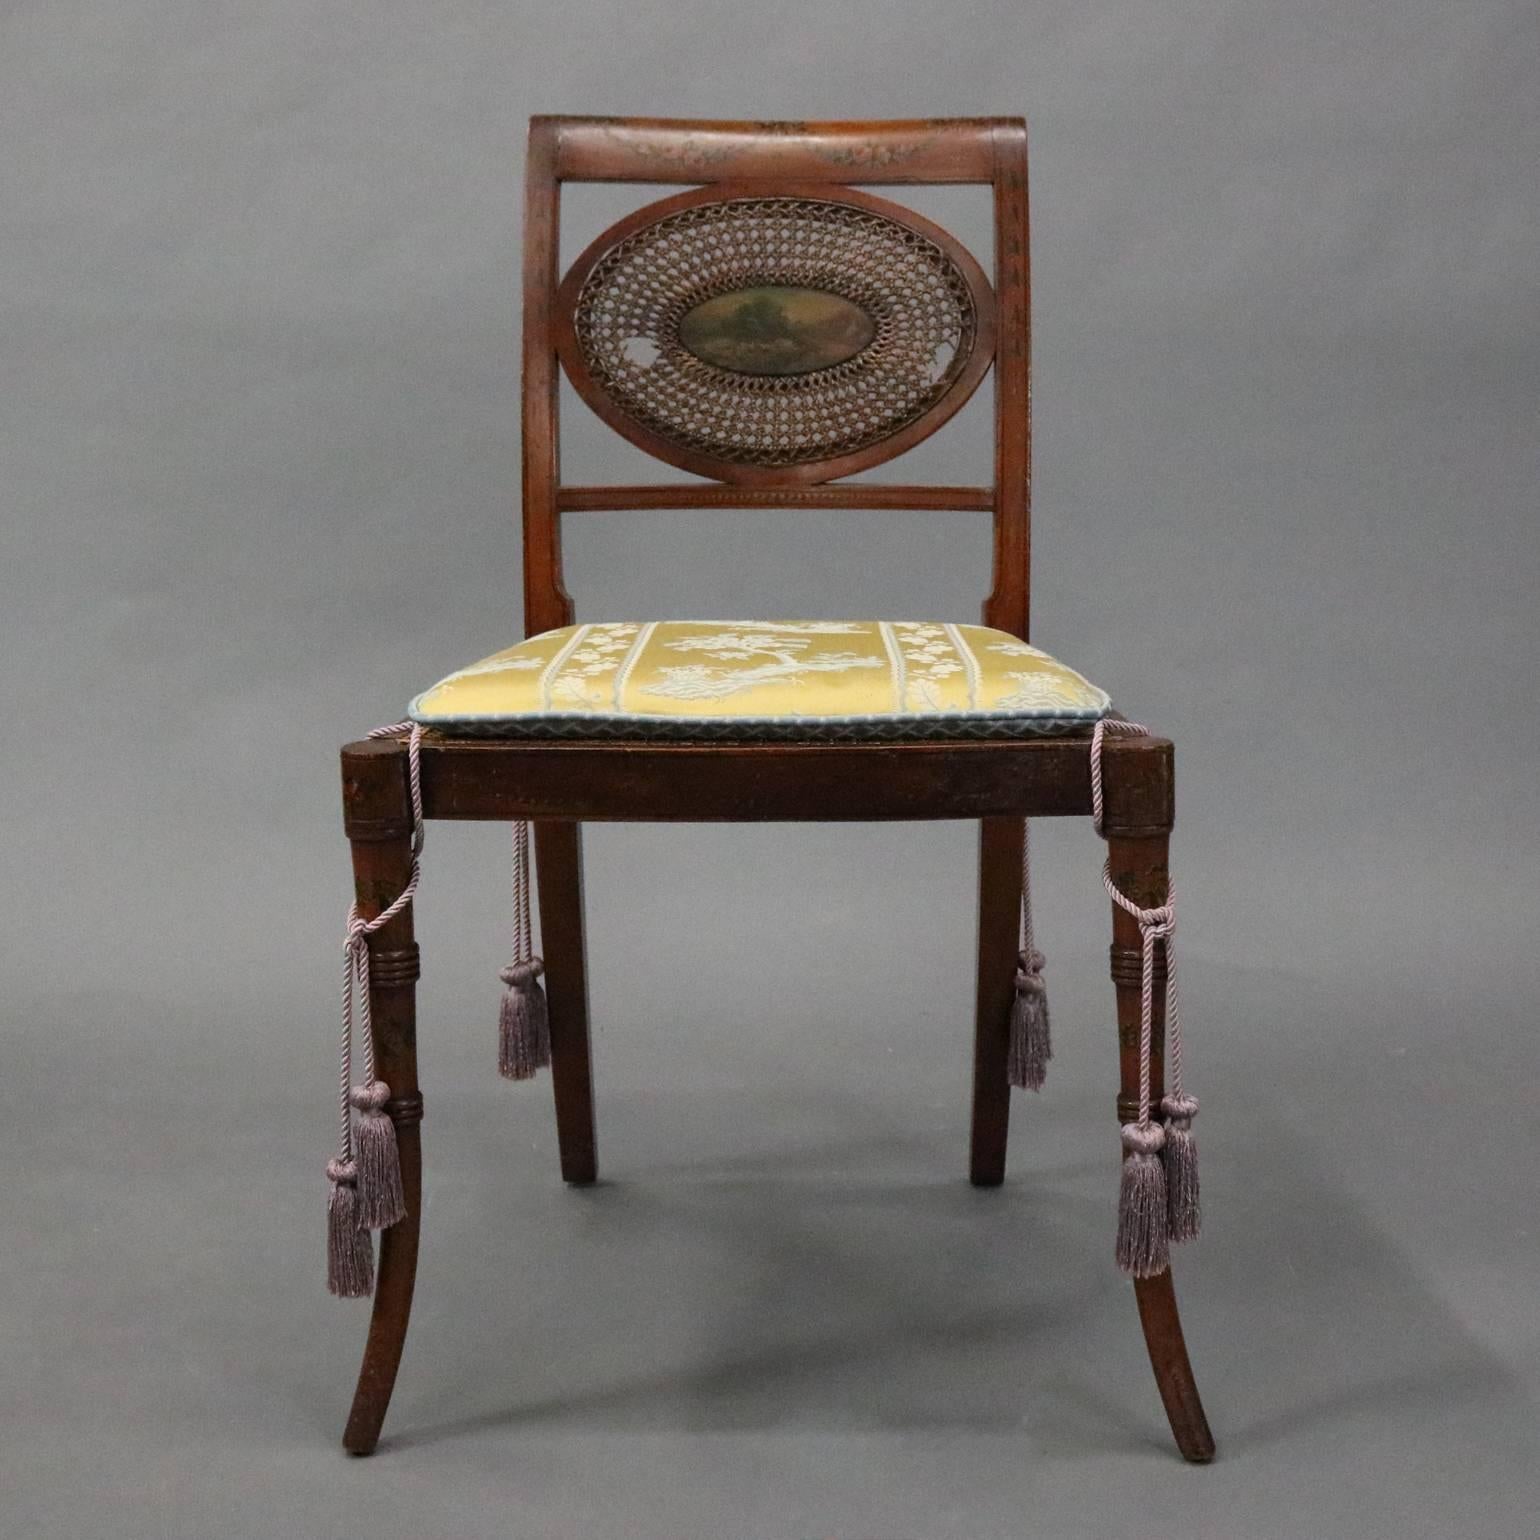 Antique English Regency Hand-Painted and Caned Mahogany Side Chair, circa 1890 (Englisch)